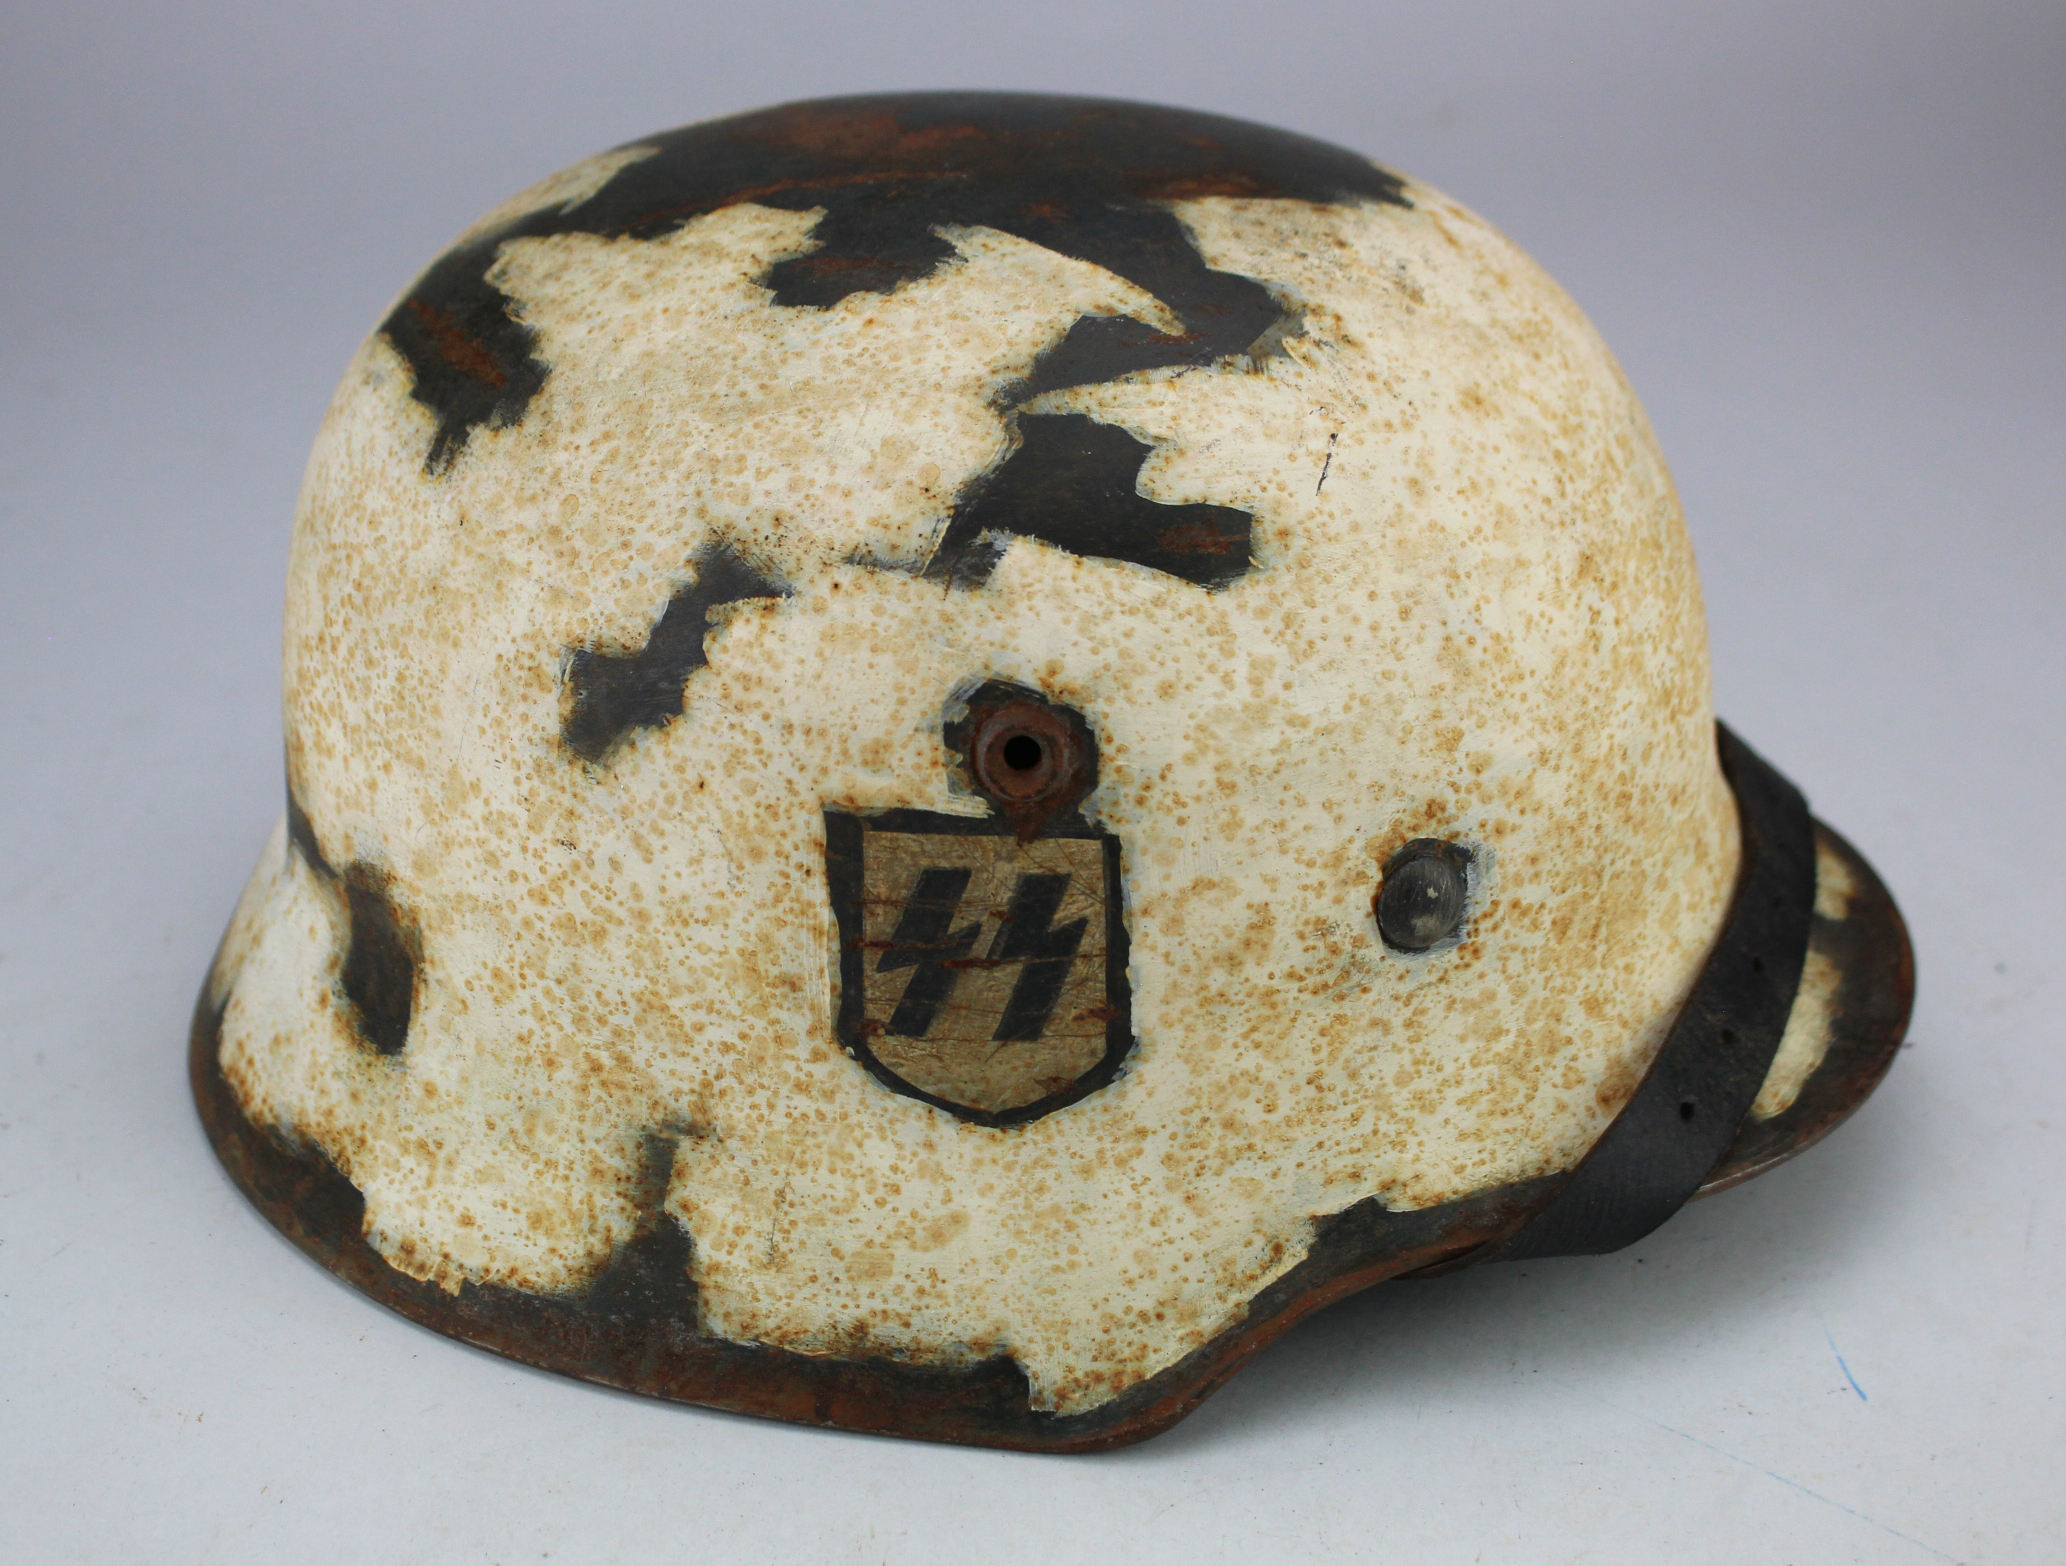 German SS winter camo single decal combat M35 helmet, complete with liner and chin strap, ET62 and